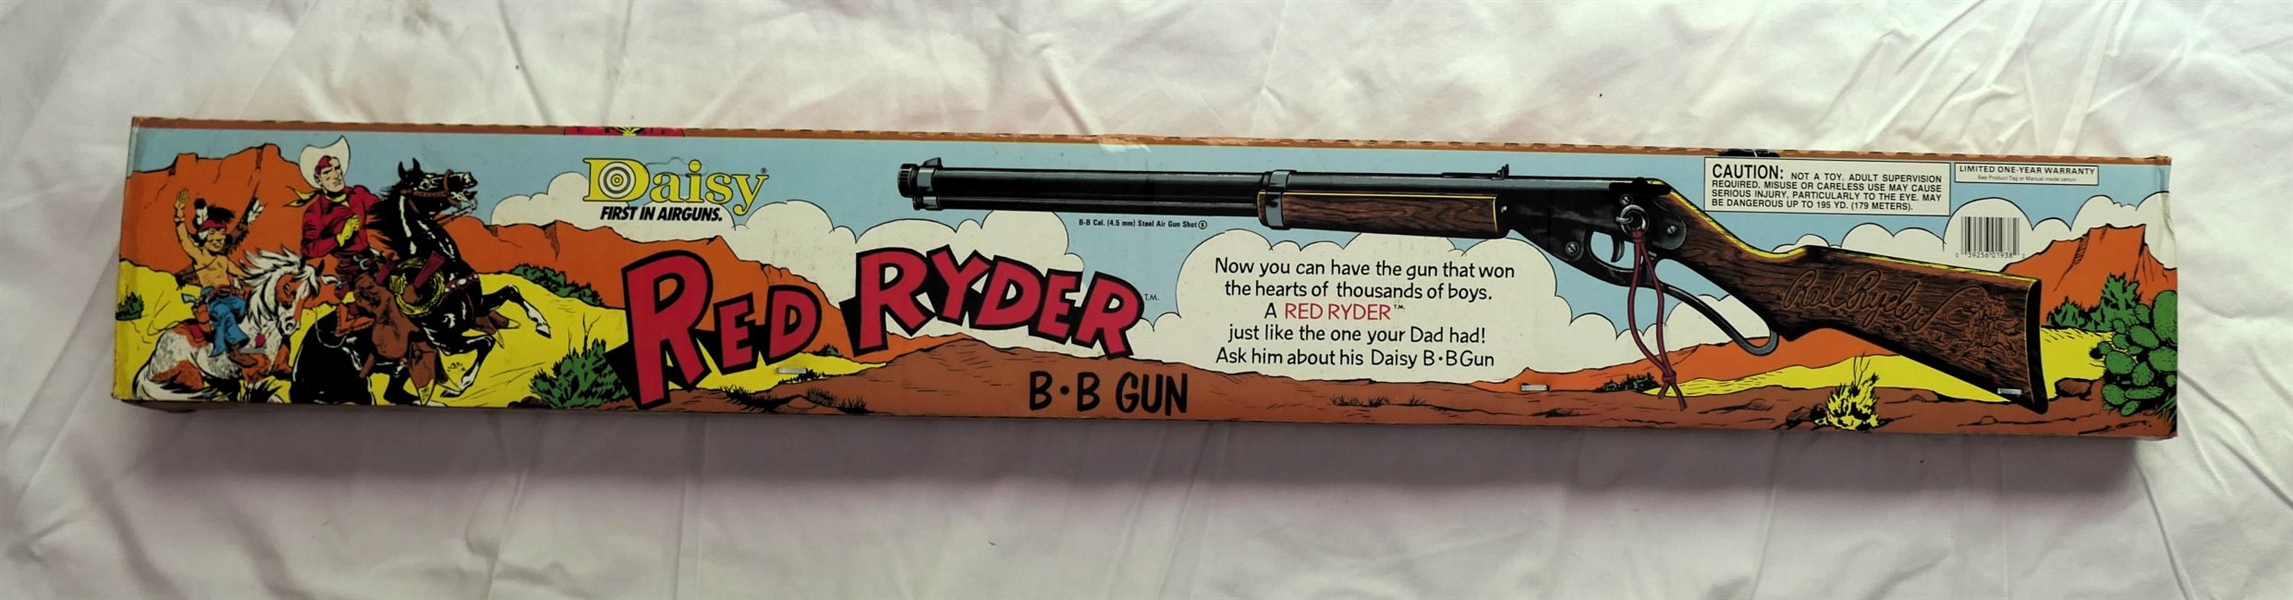 Daisy Red Ryder BB Gun  - In Original Box - Appears Unopened - With Daisy Red Ryder BB Treasure Chest with BBs